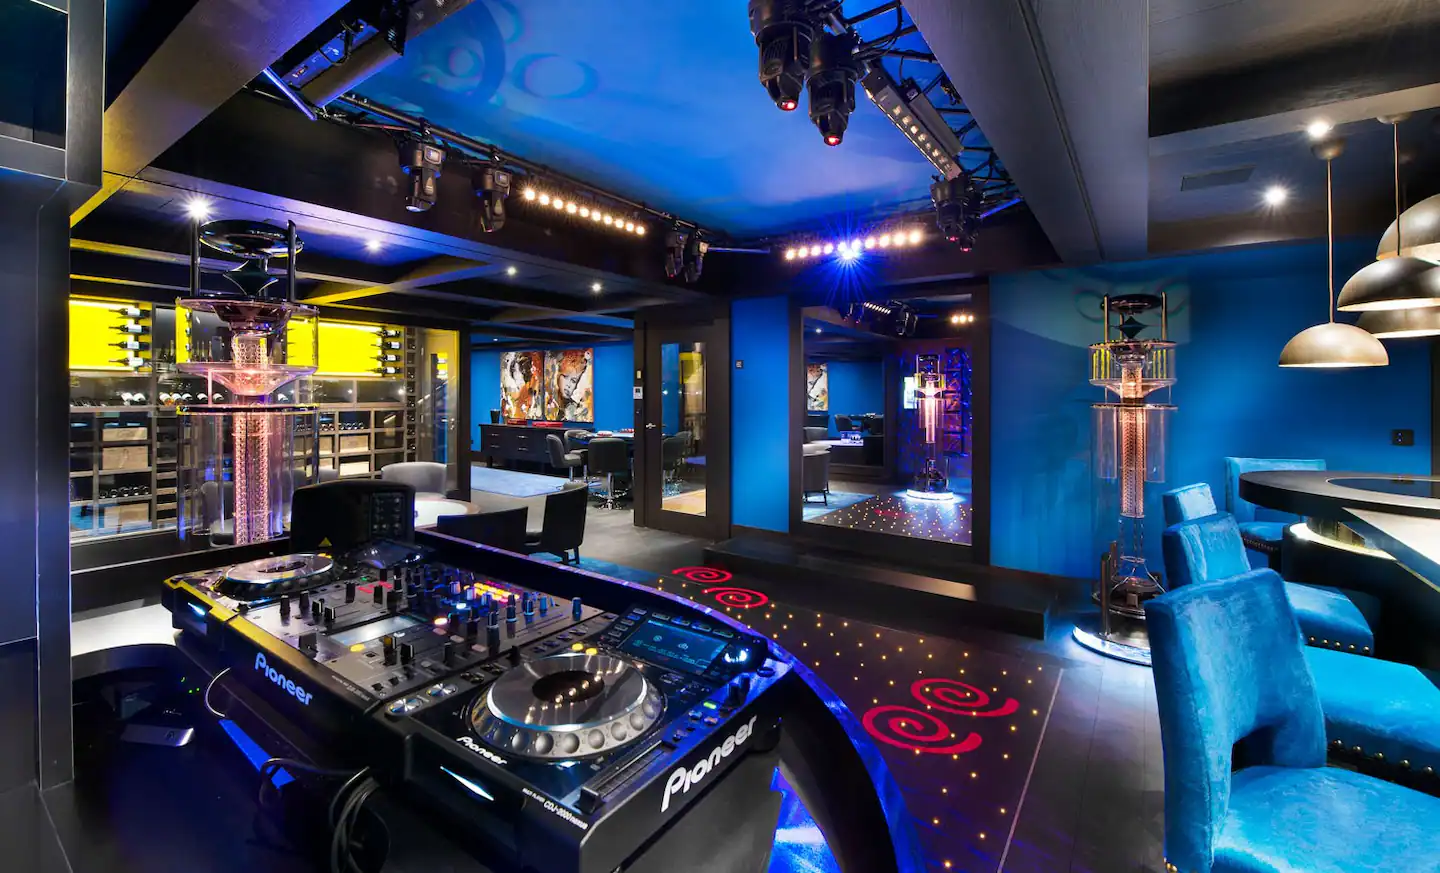 Unleash your inner dancer in the private bar with a dazzling dance floor and DJ booth.